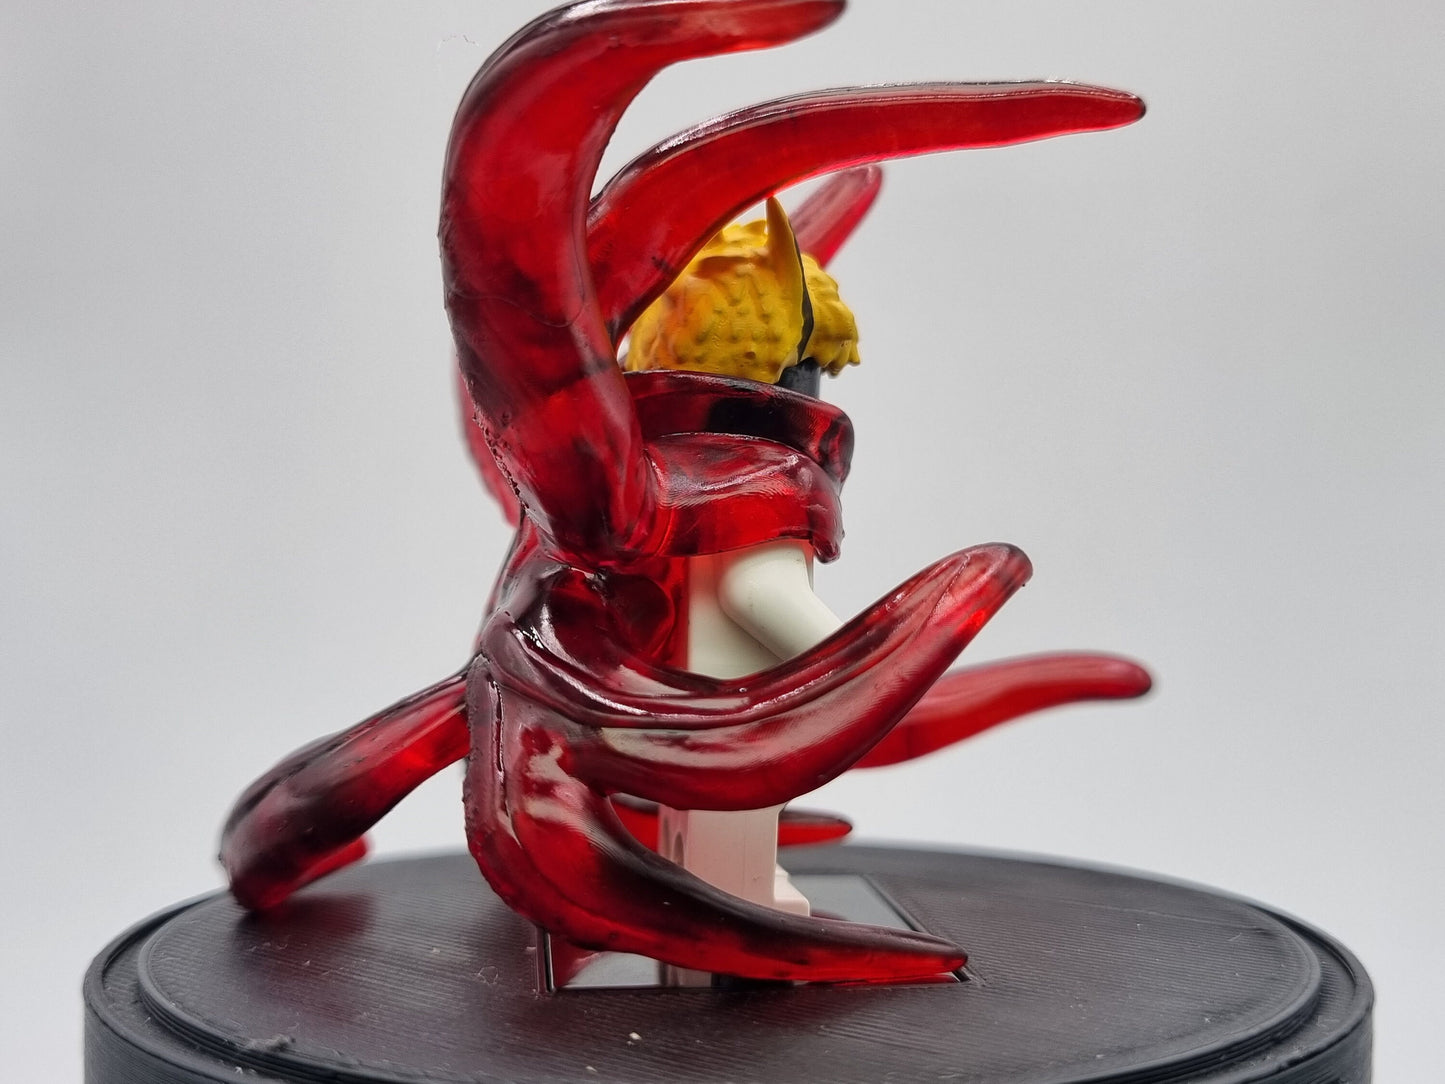 Building toy custom 3D printed and fully painted transparent tentical mode!